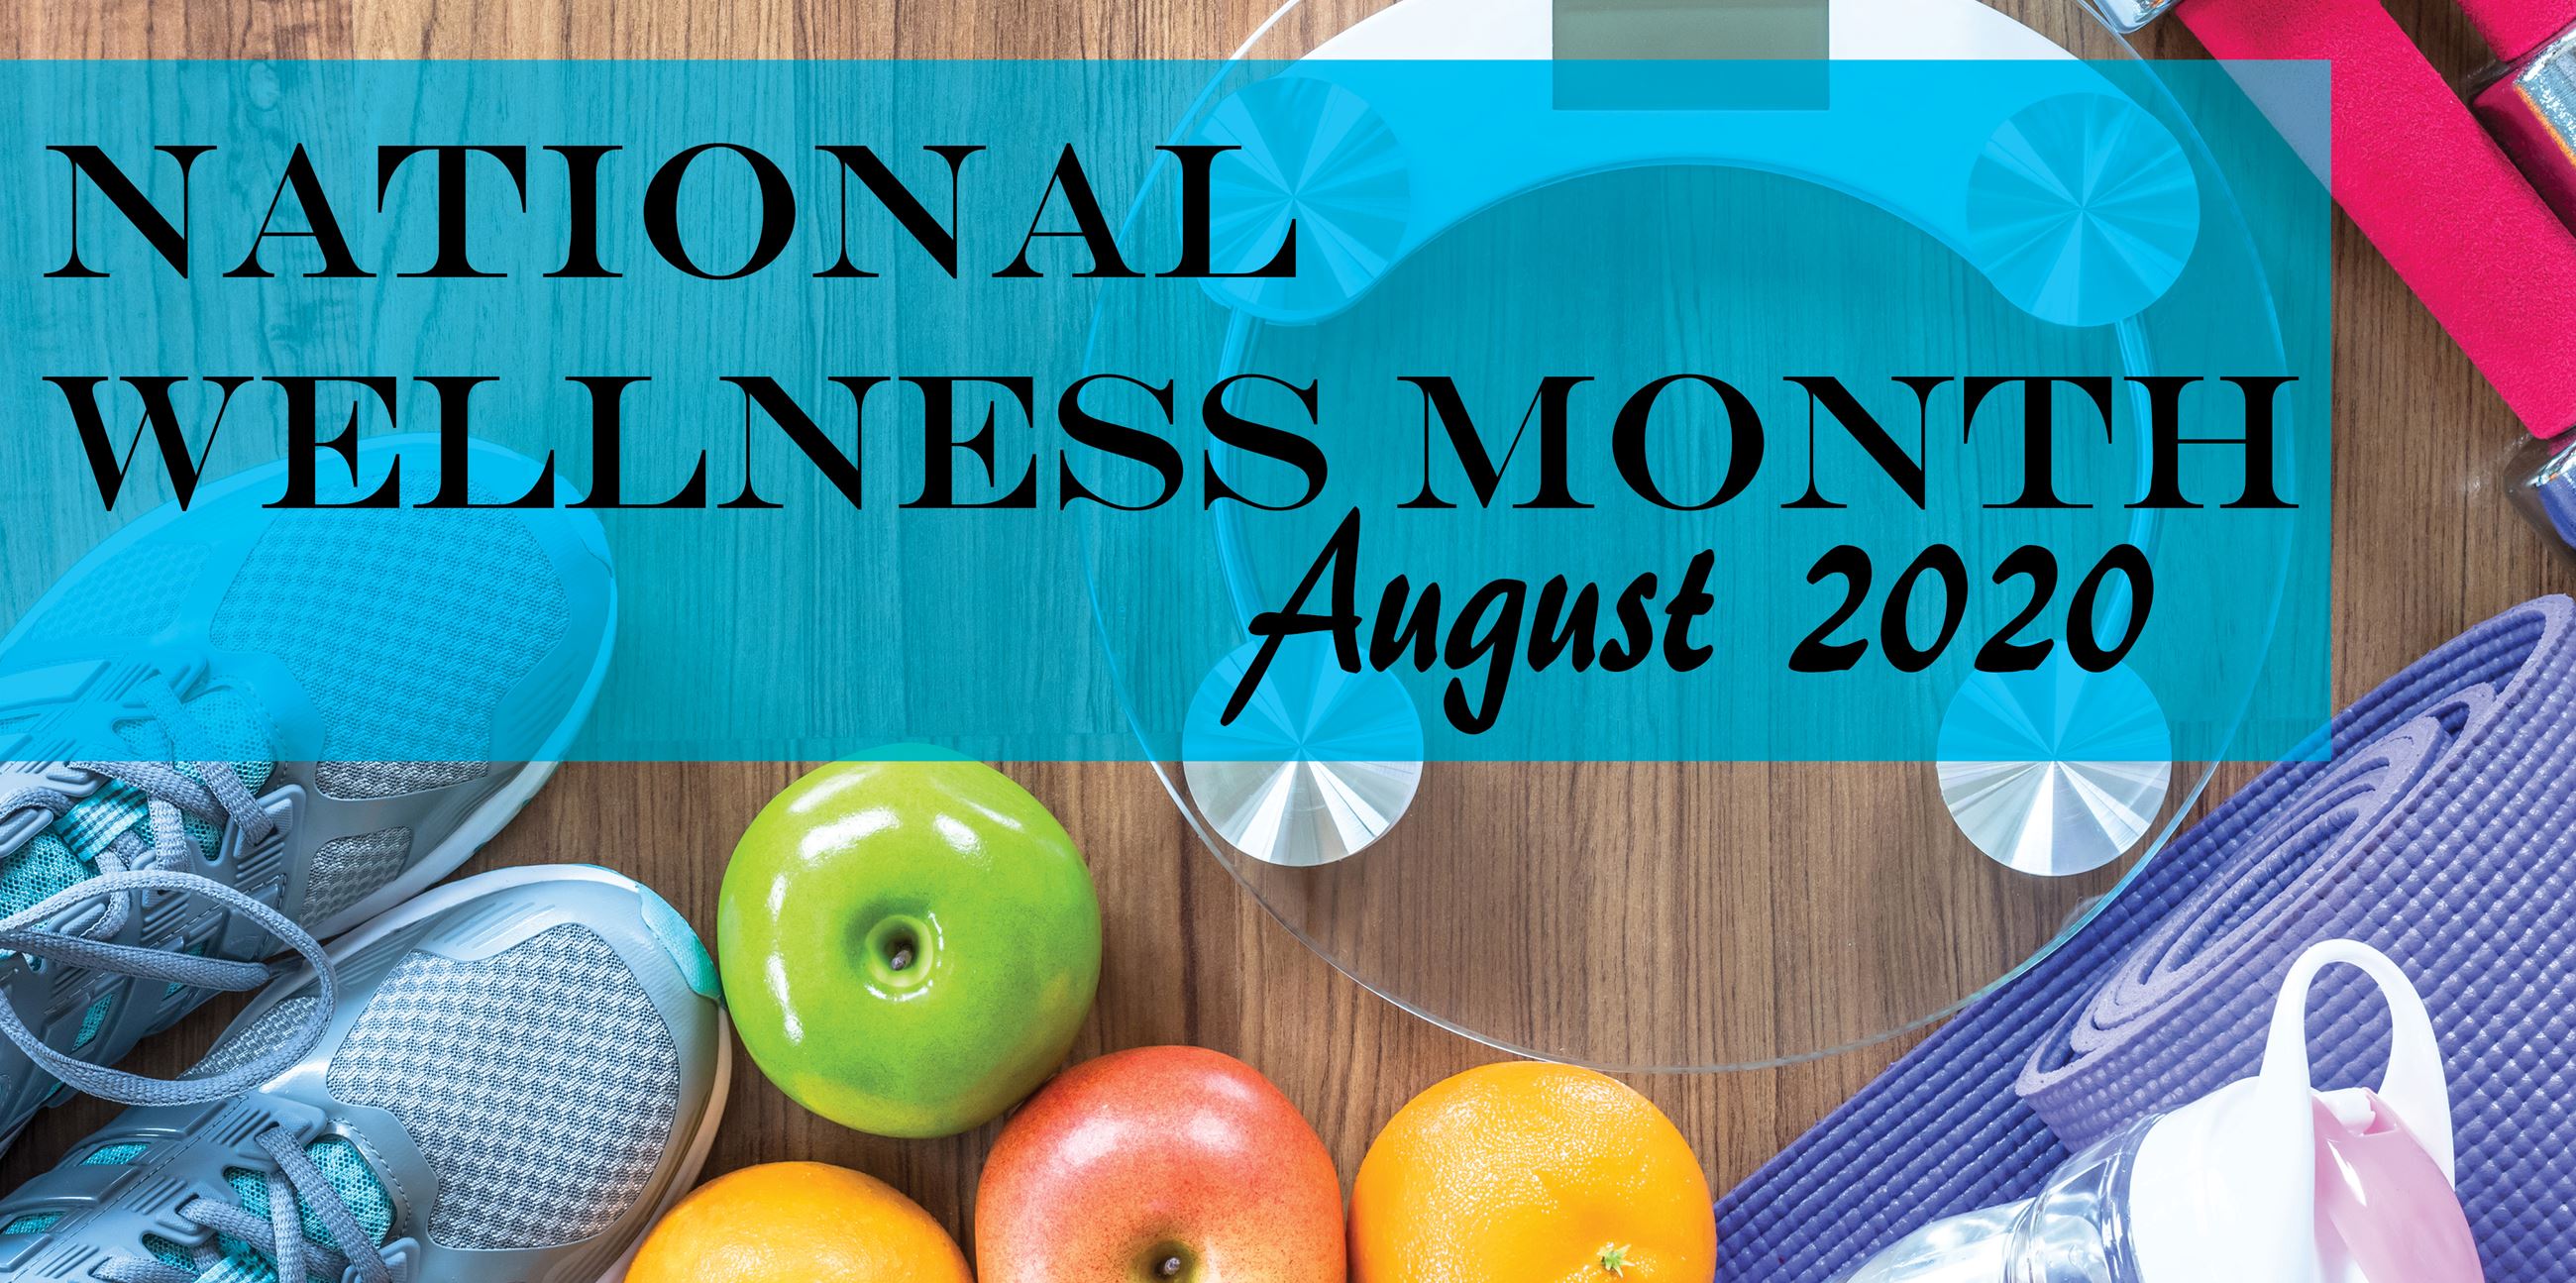 August is National Wellness Month Jackson County MO